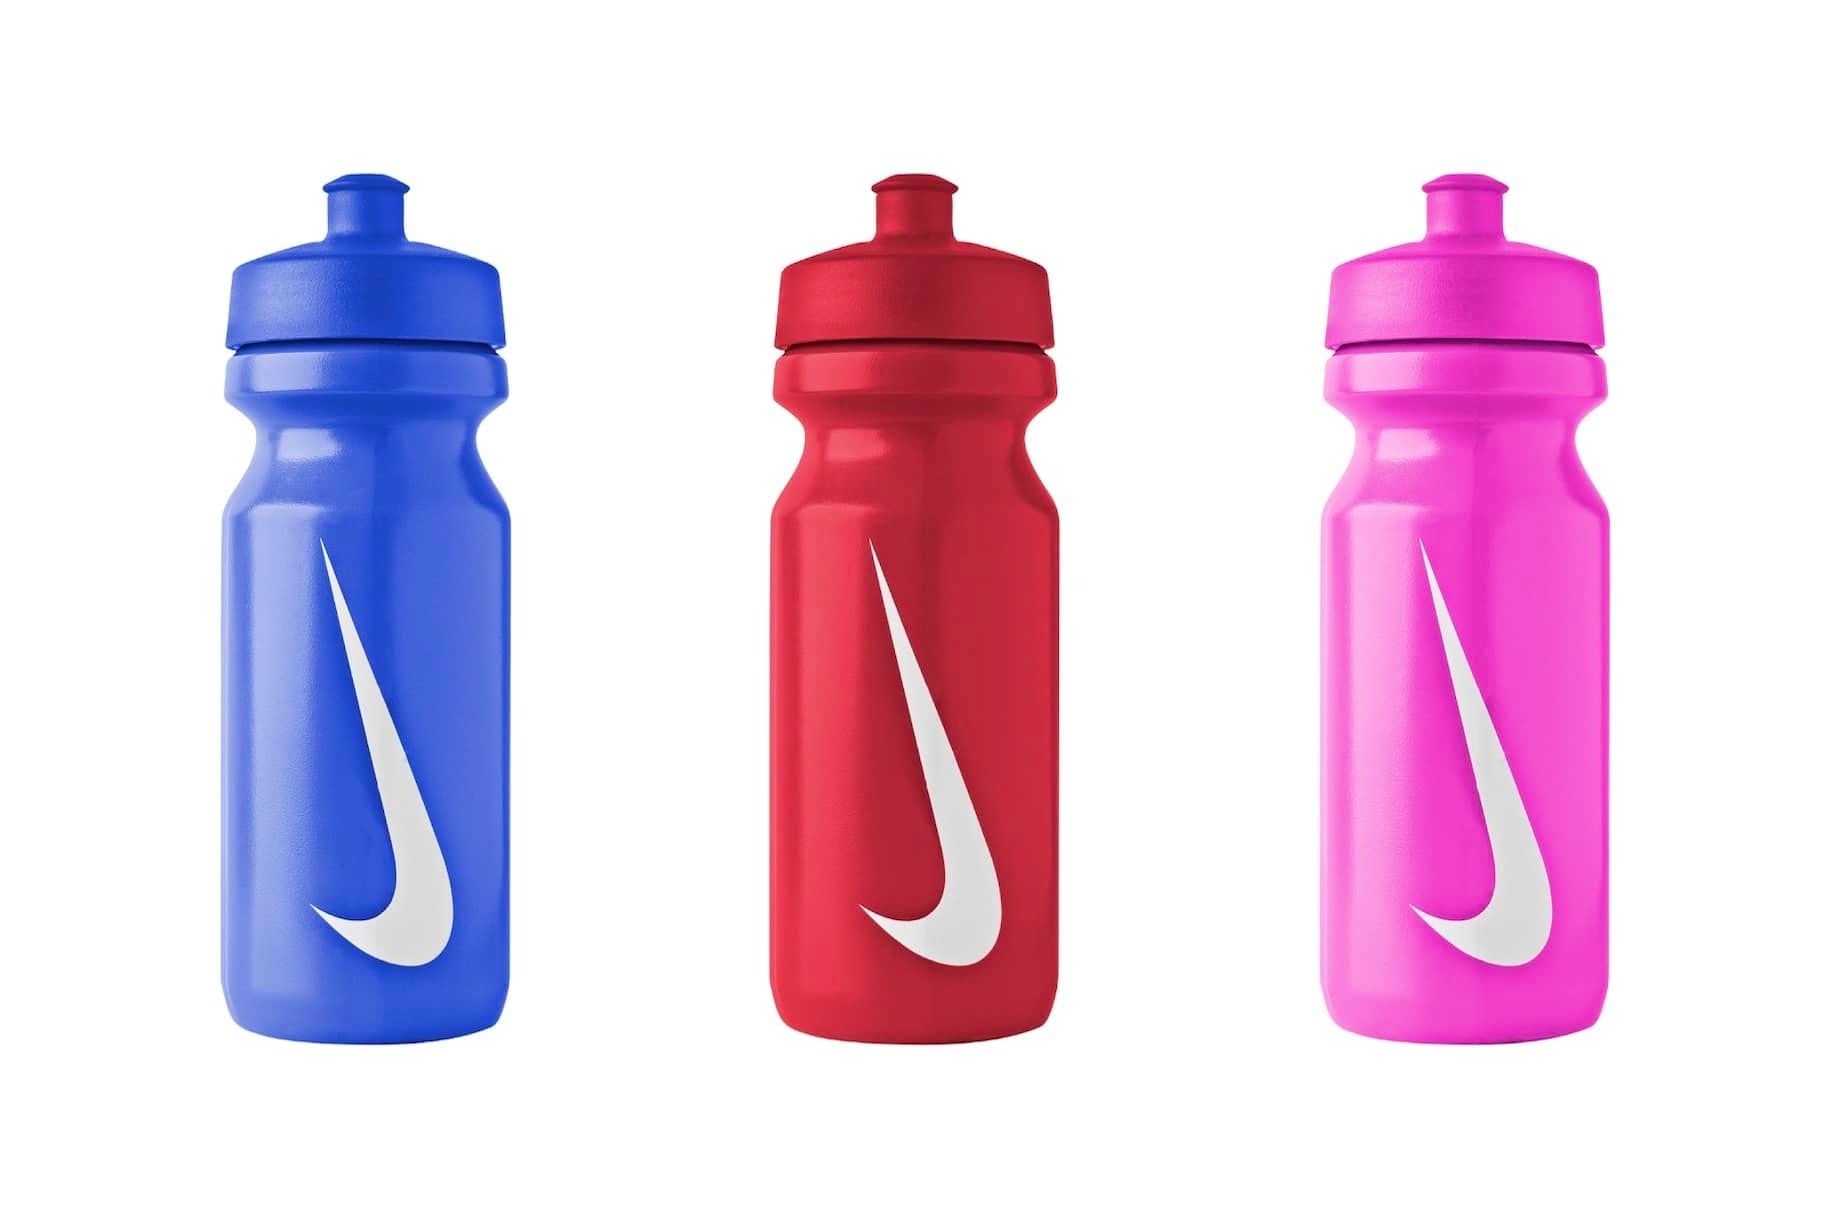 What is the Best Way To Clean A Water Bottle?